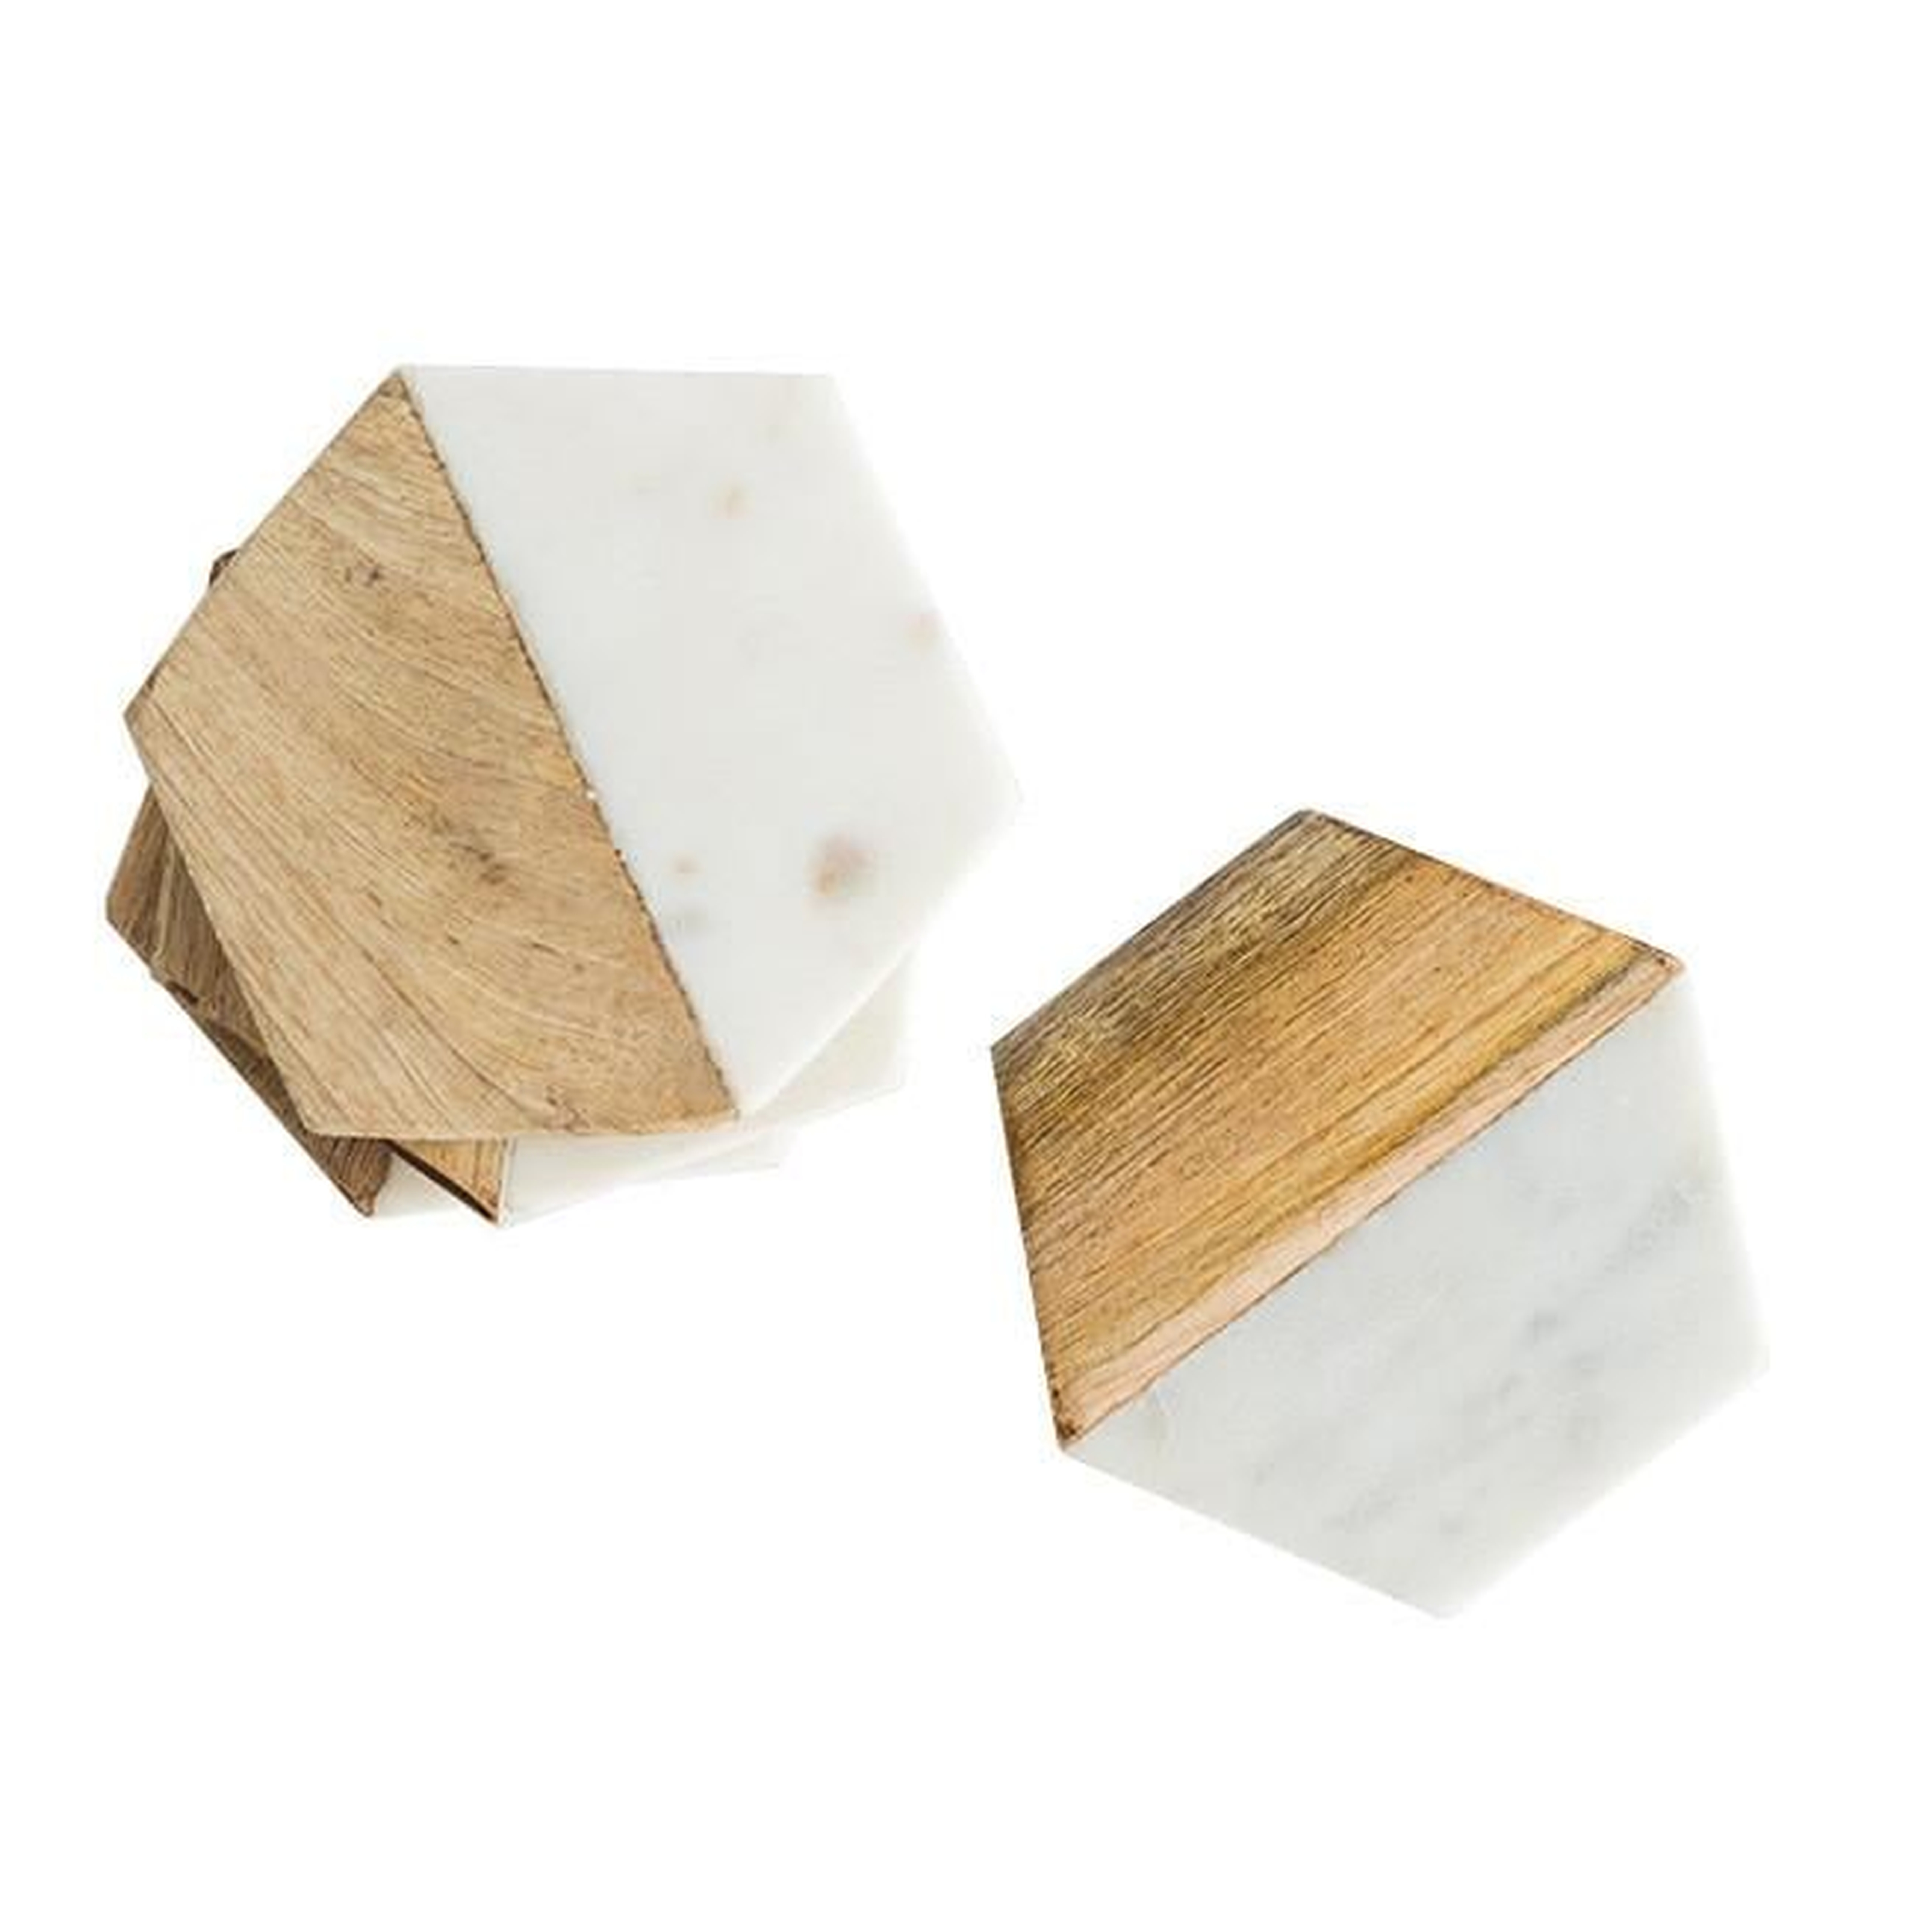 HEX COASTERS (SET OF 4) - McGee & Co.